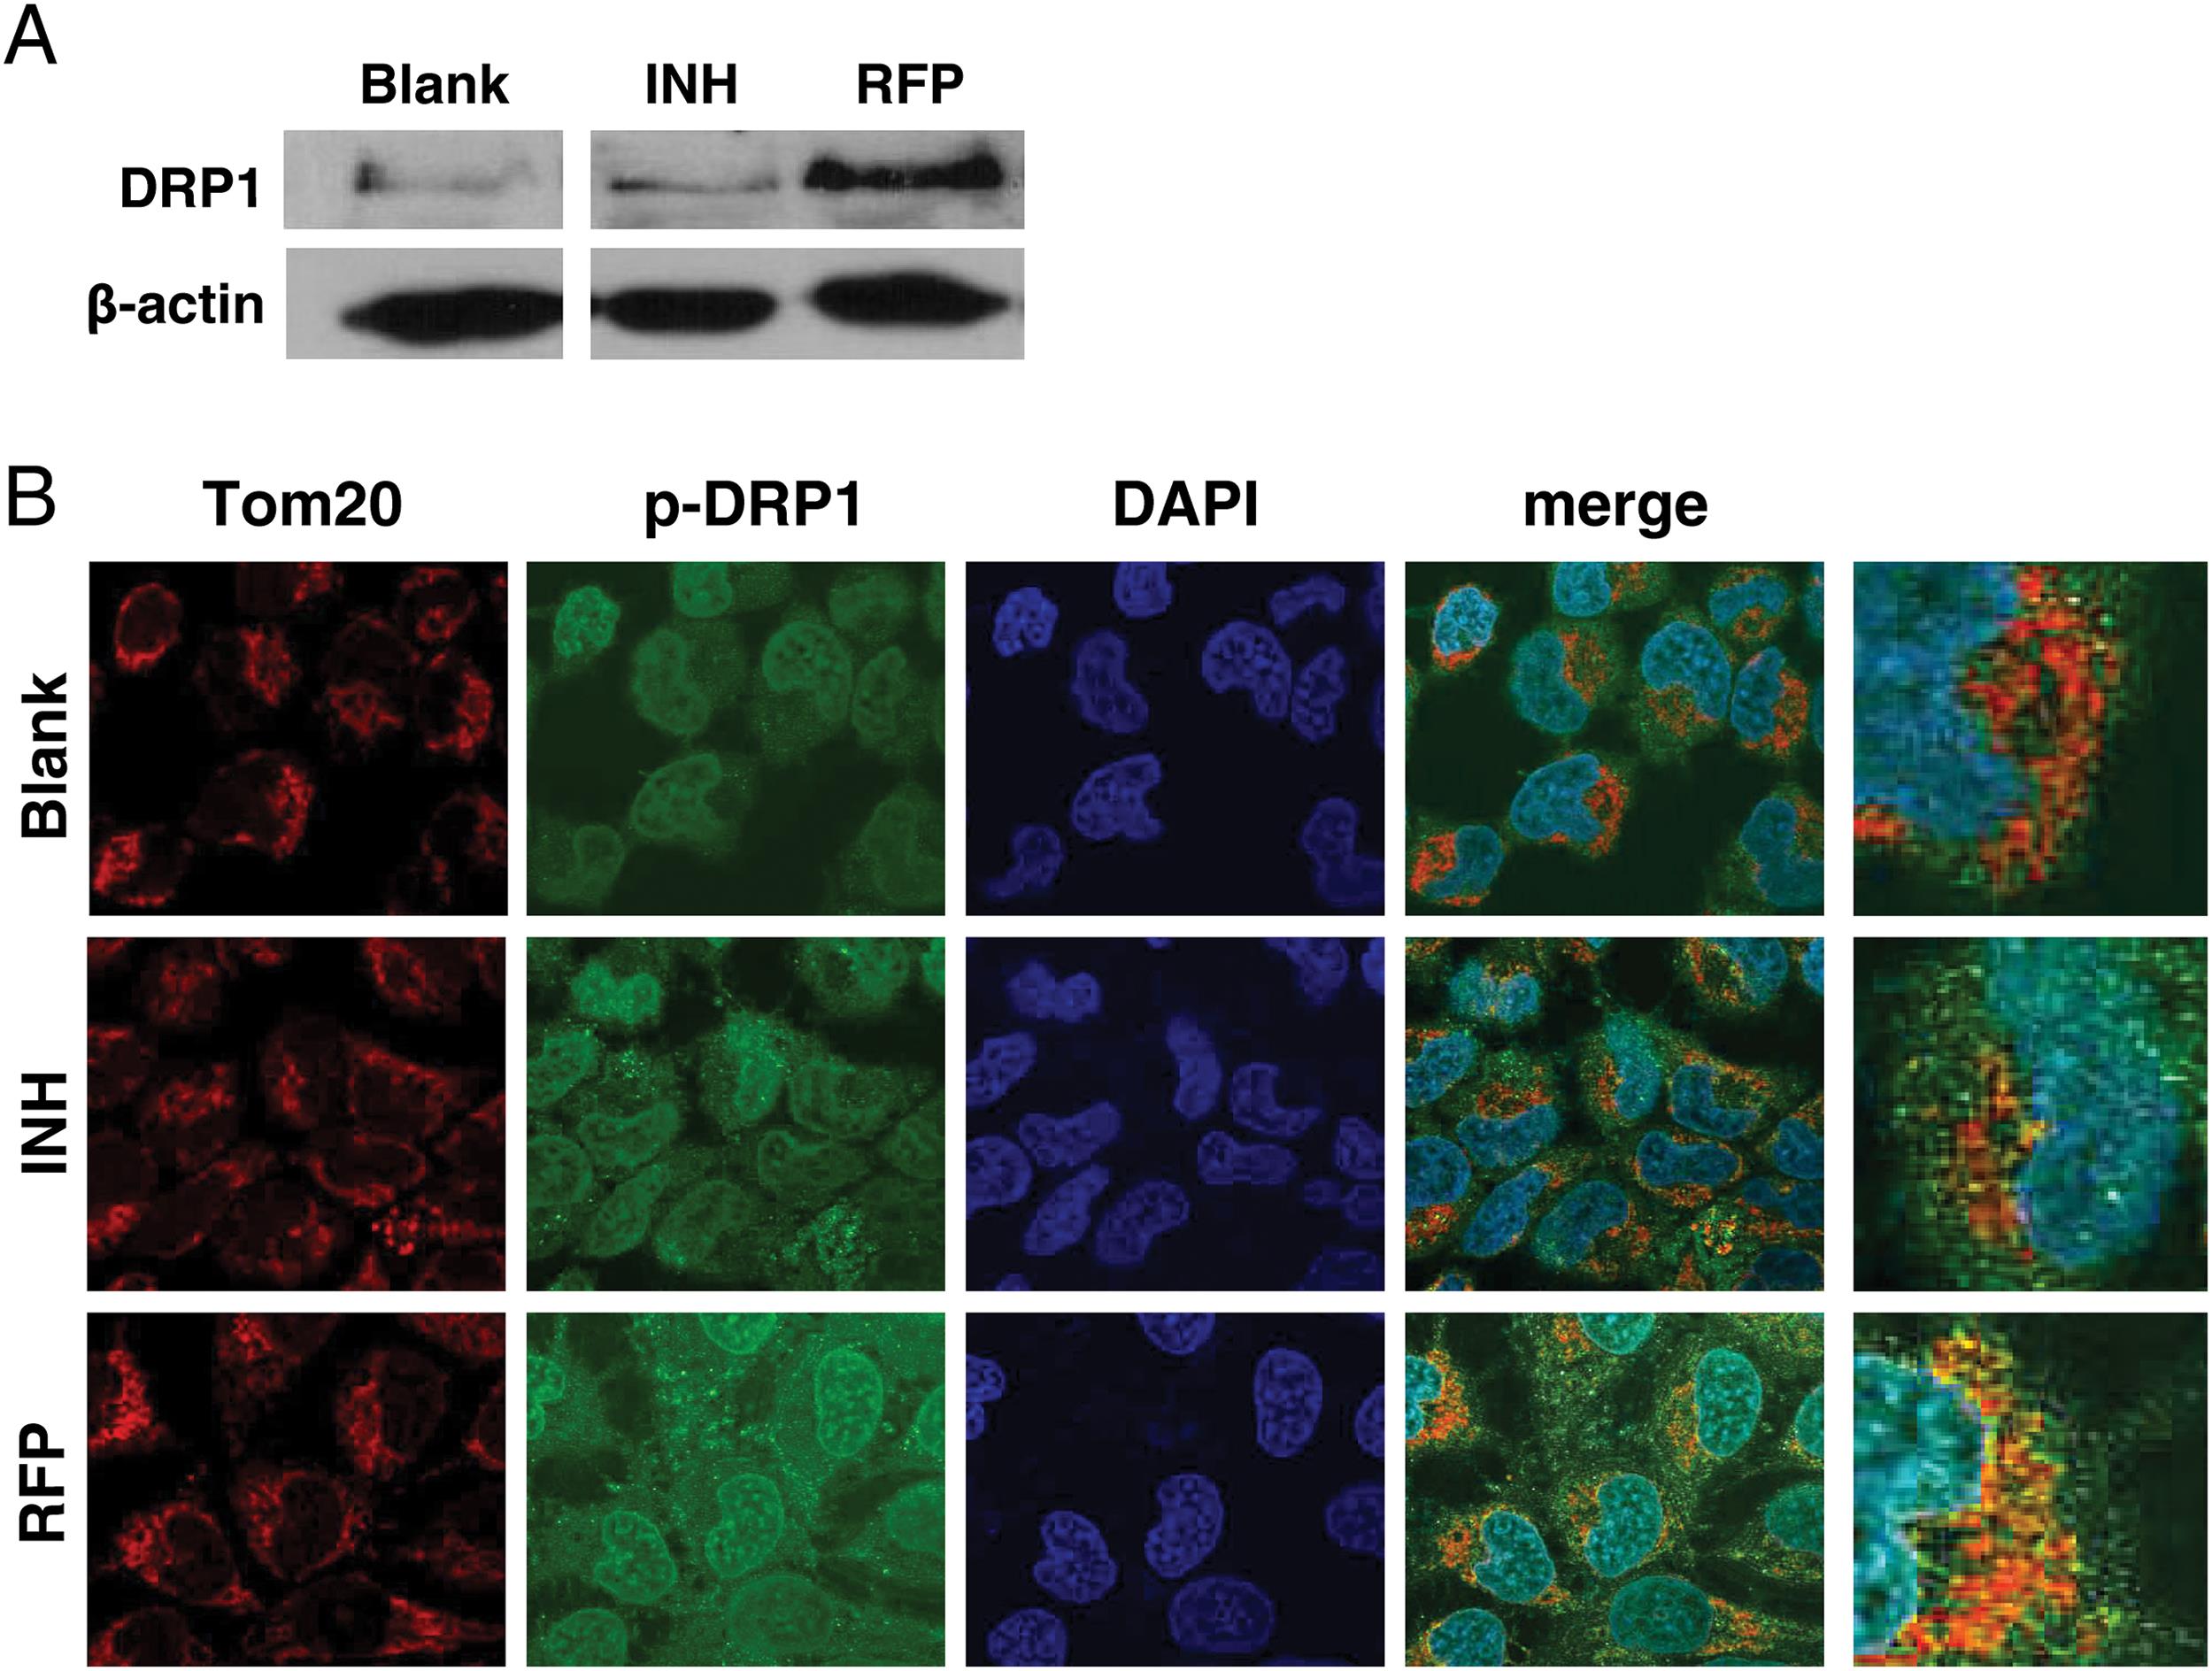 Effect of RFP and INH on the expression and activation of Drp1 in QSG7701 cells.